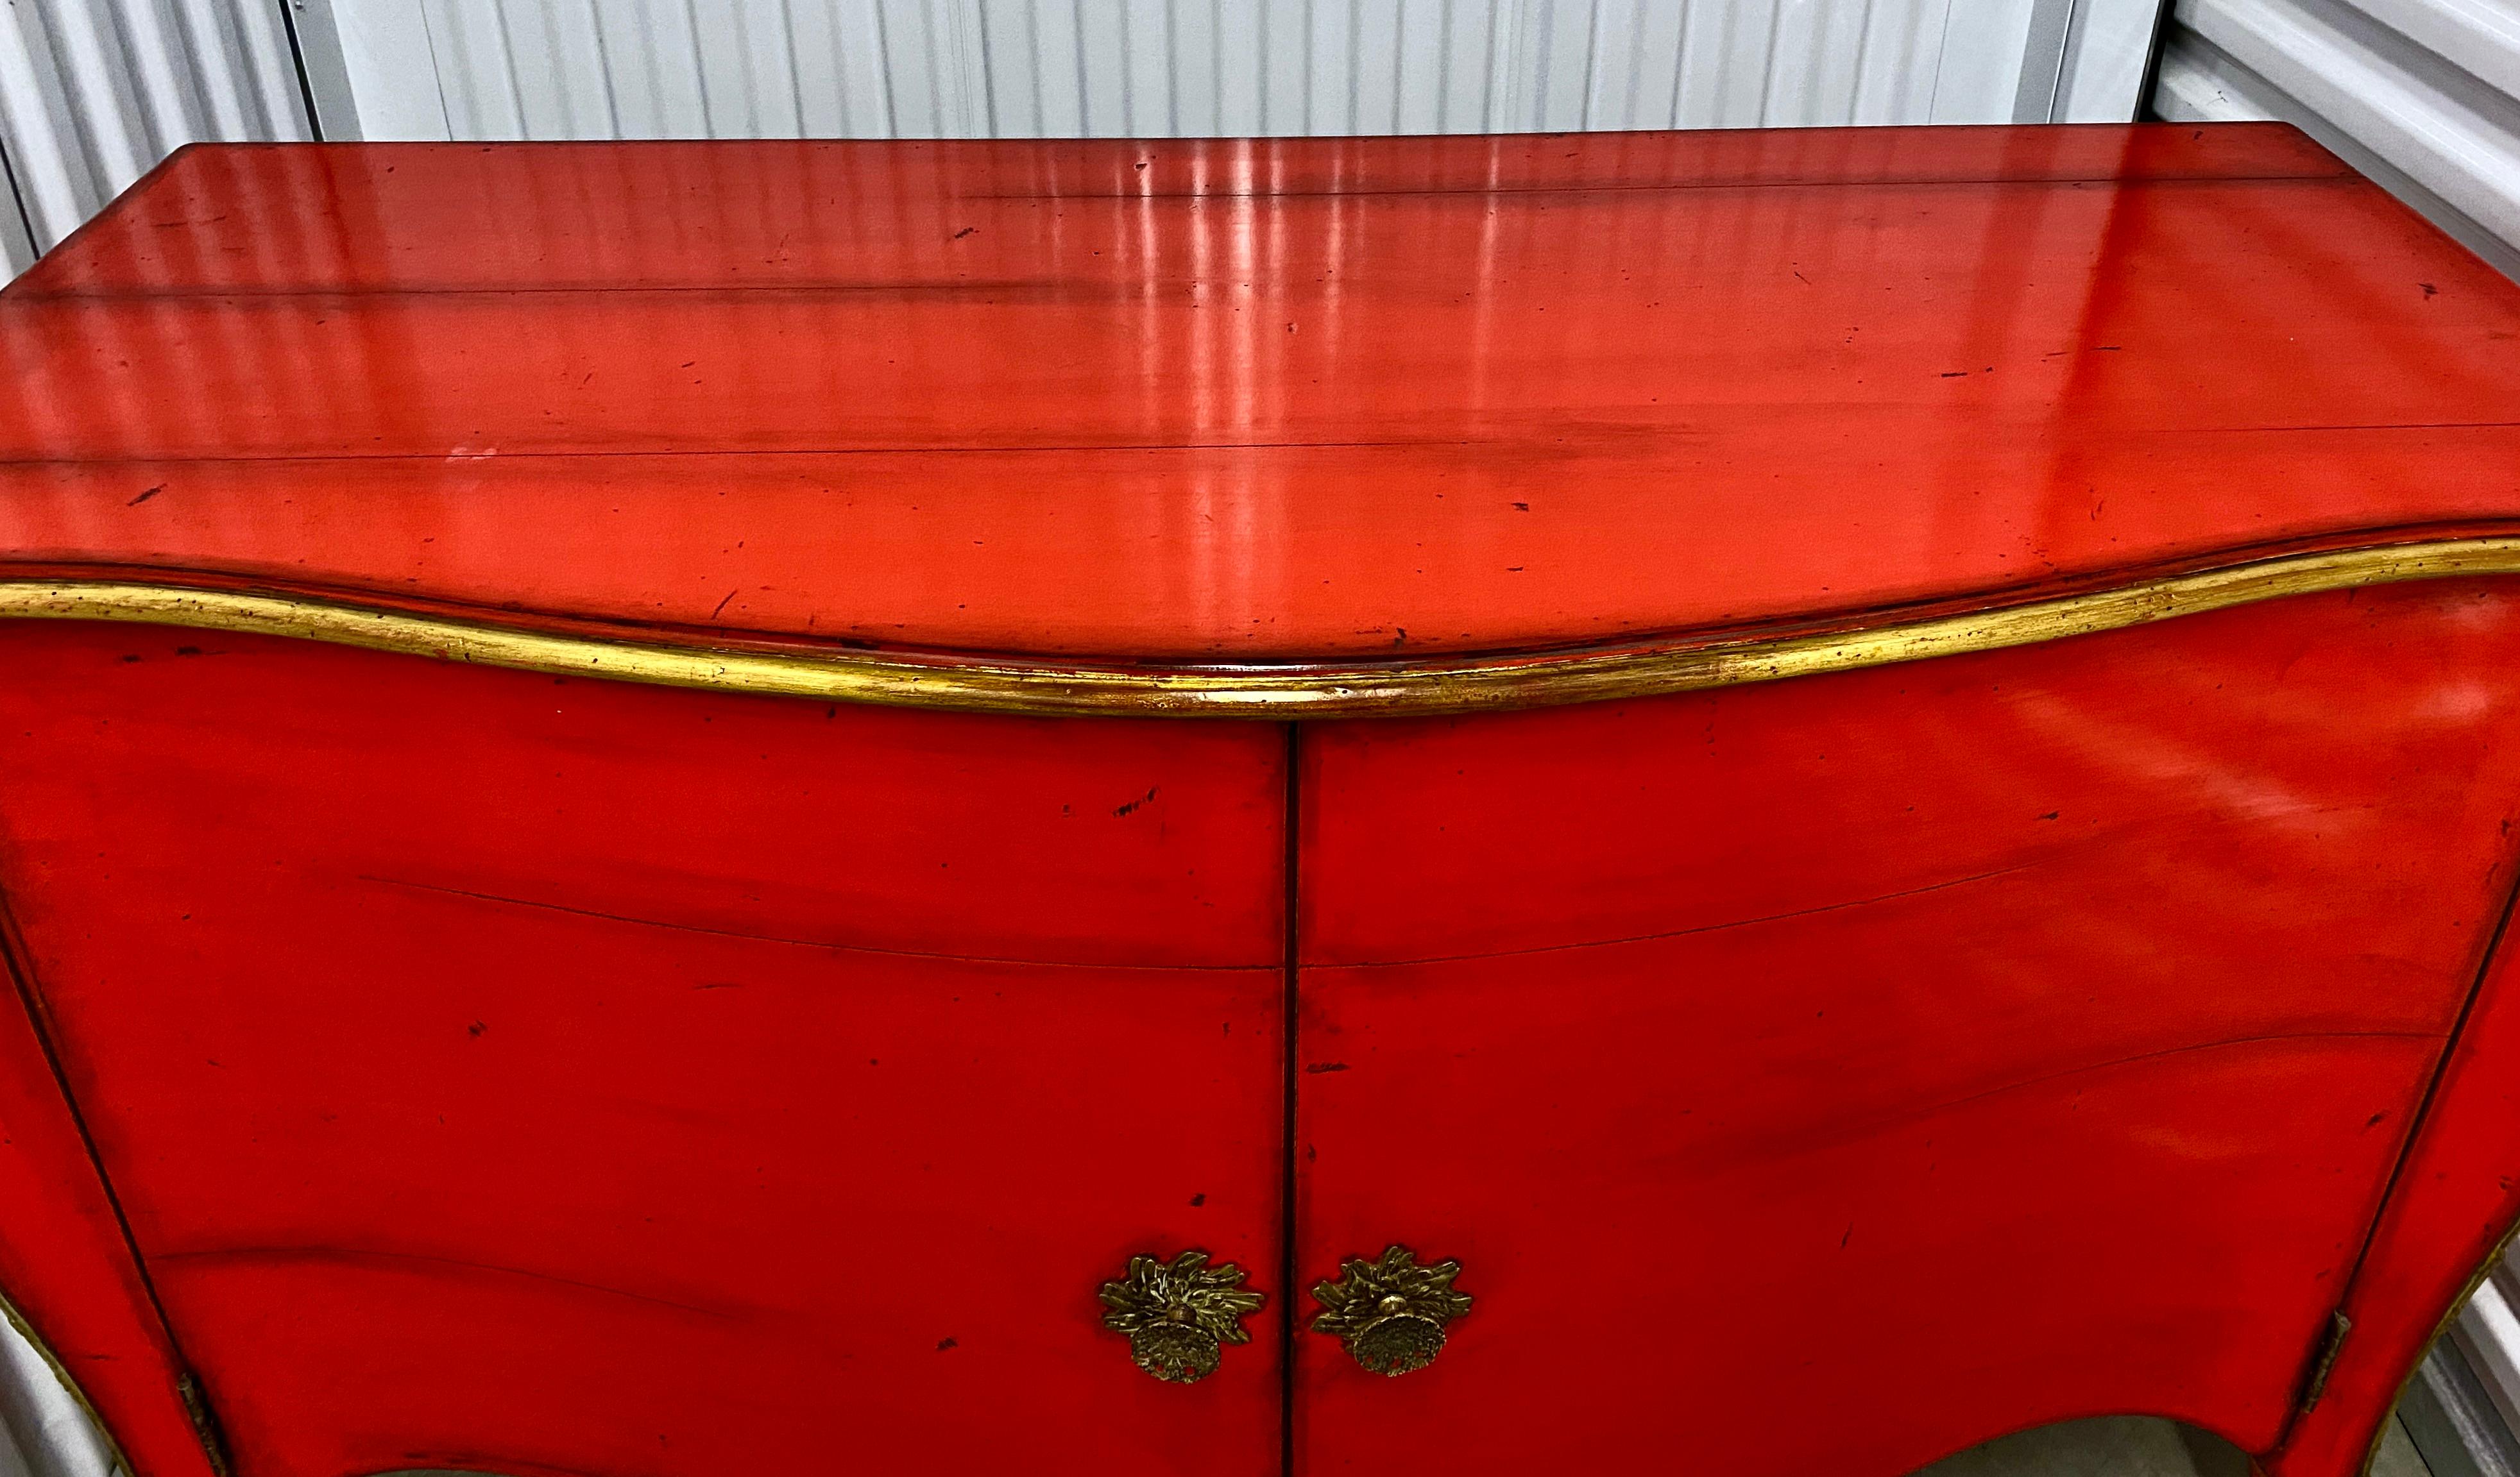 Cote France Painted Commode 1